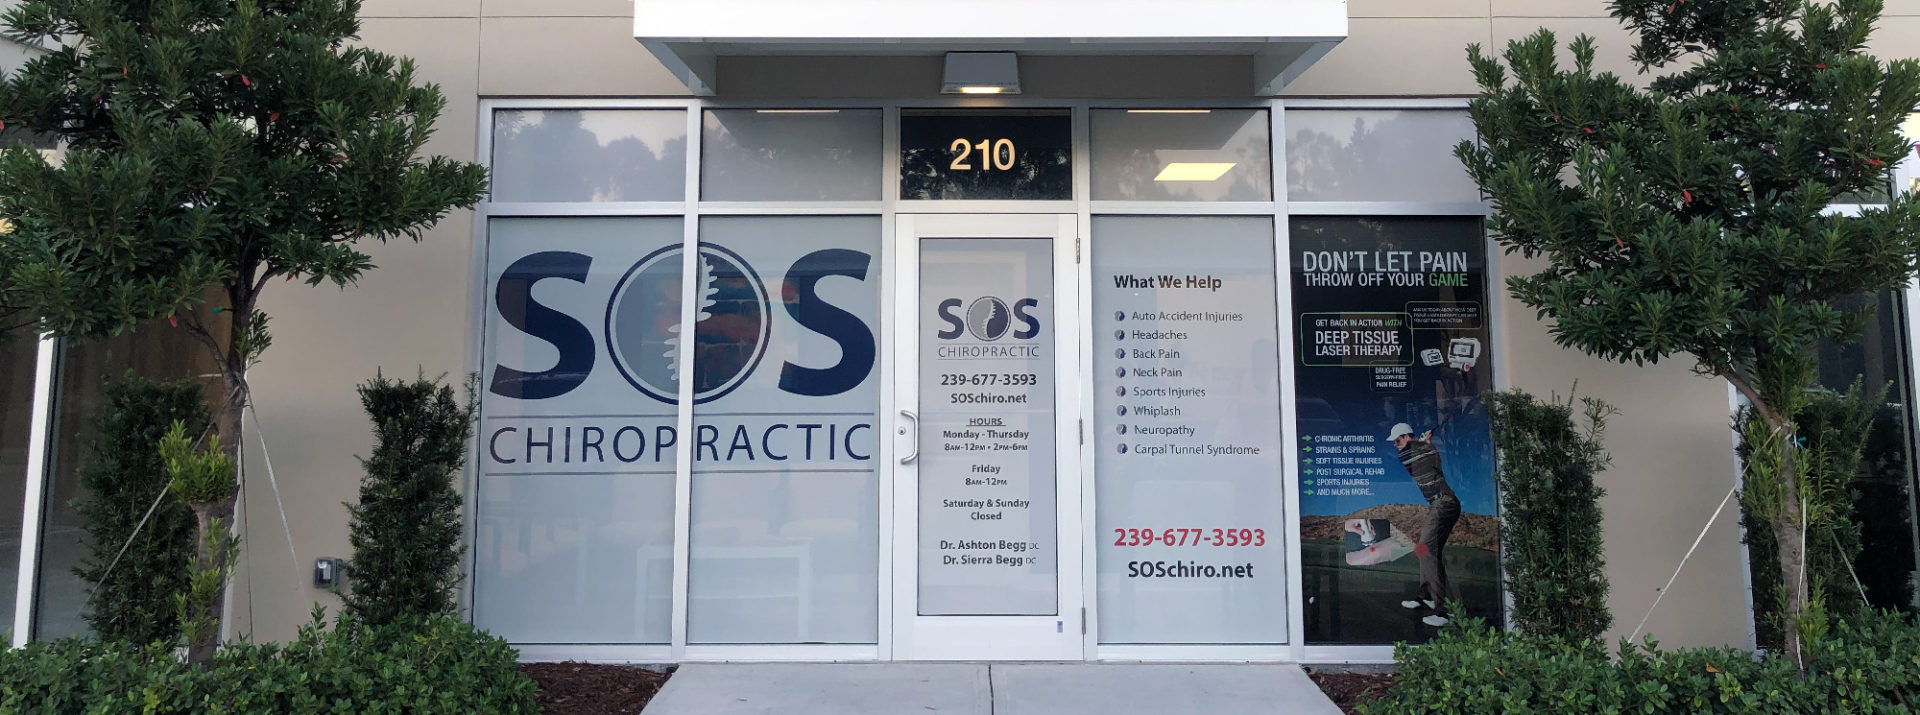 SOS Chiropractic has been in business and treating patients since 2014.